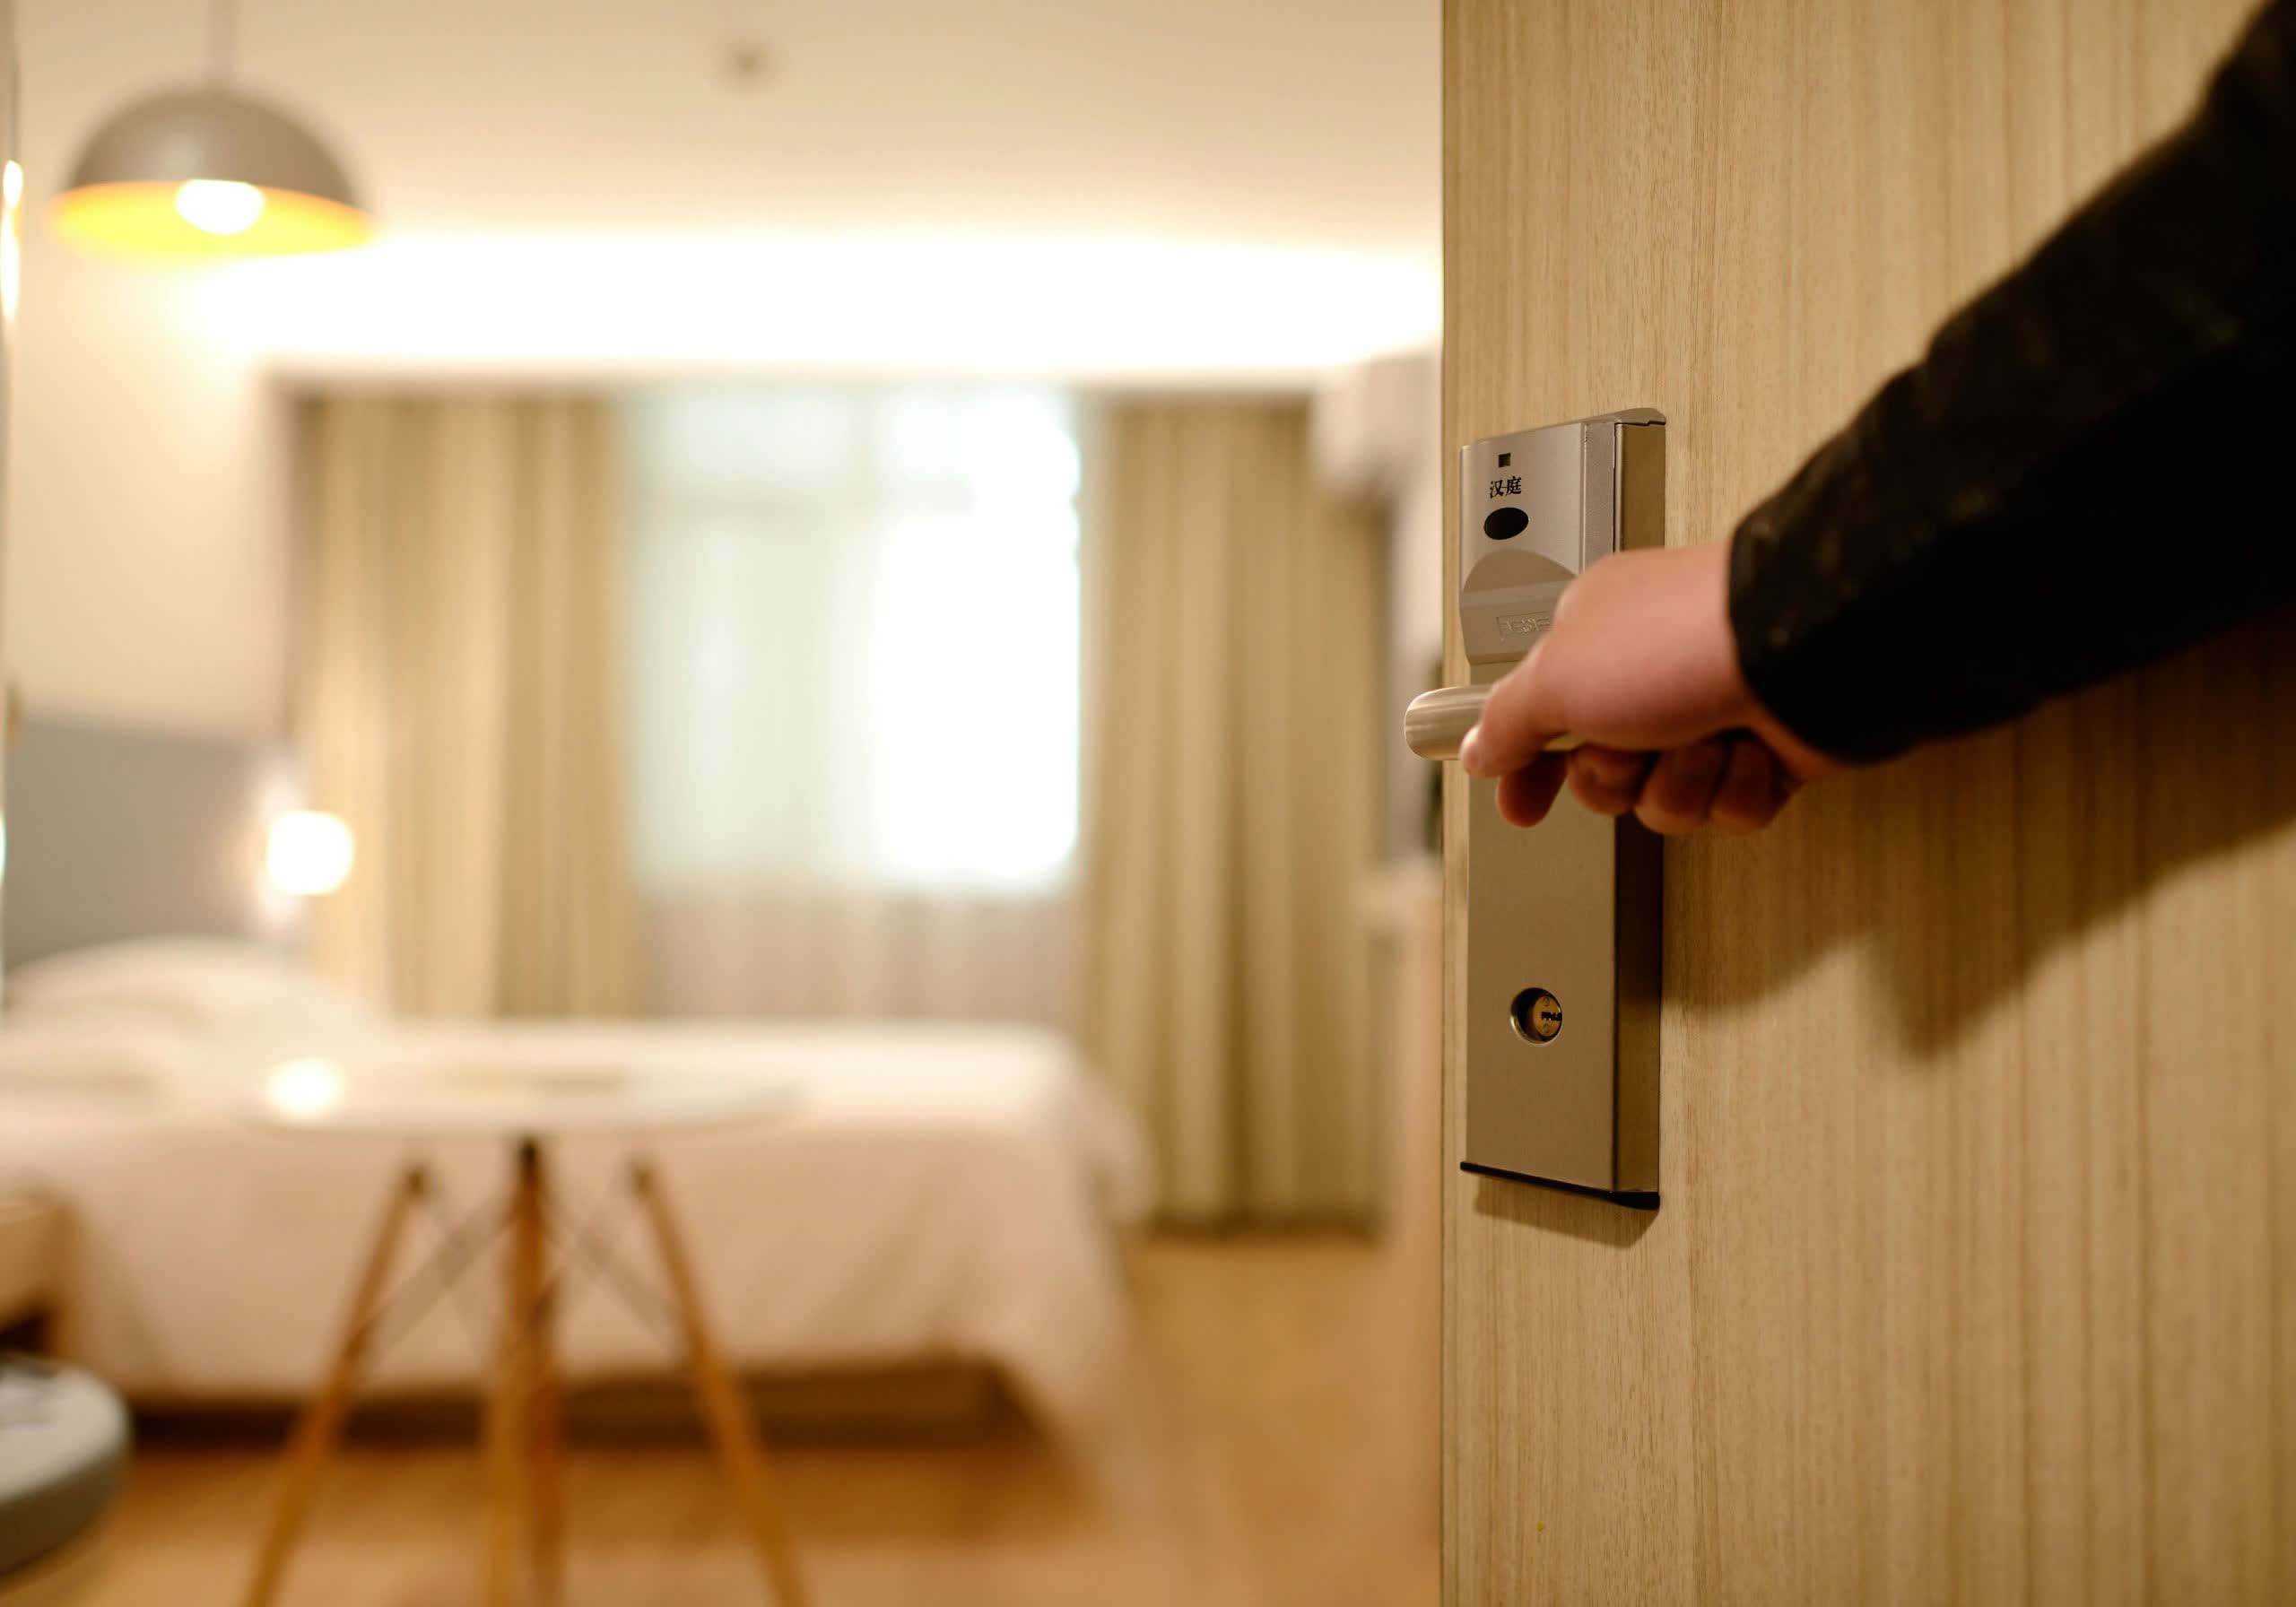 Ethical hackers show how to open millions of hotel keycard locks